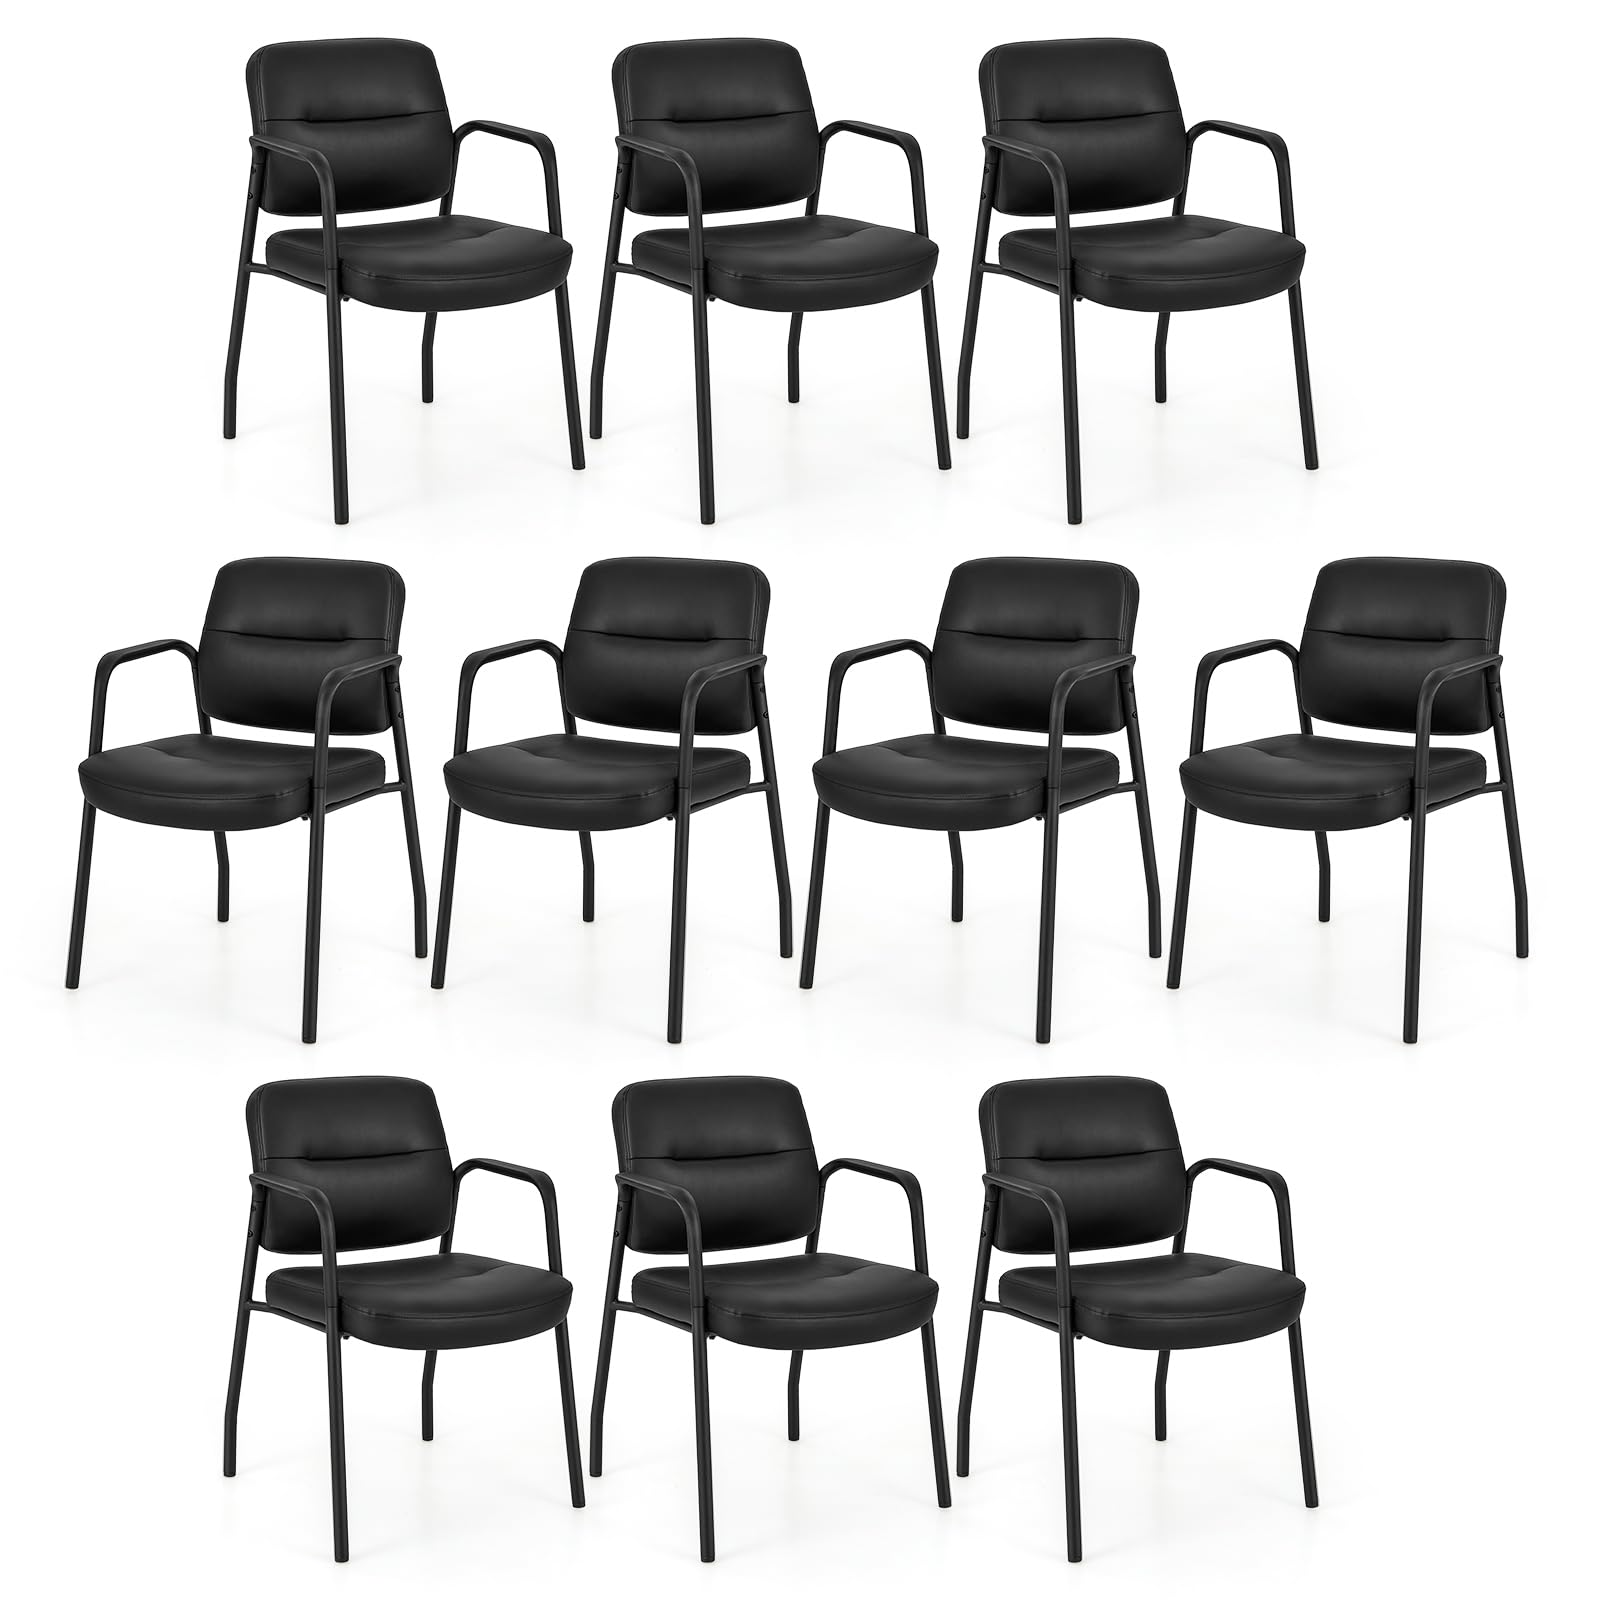 Giantex Waiting Room Chair Set - Upholstered Reception Chairs with Mixed PU Leather